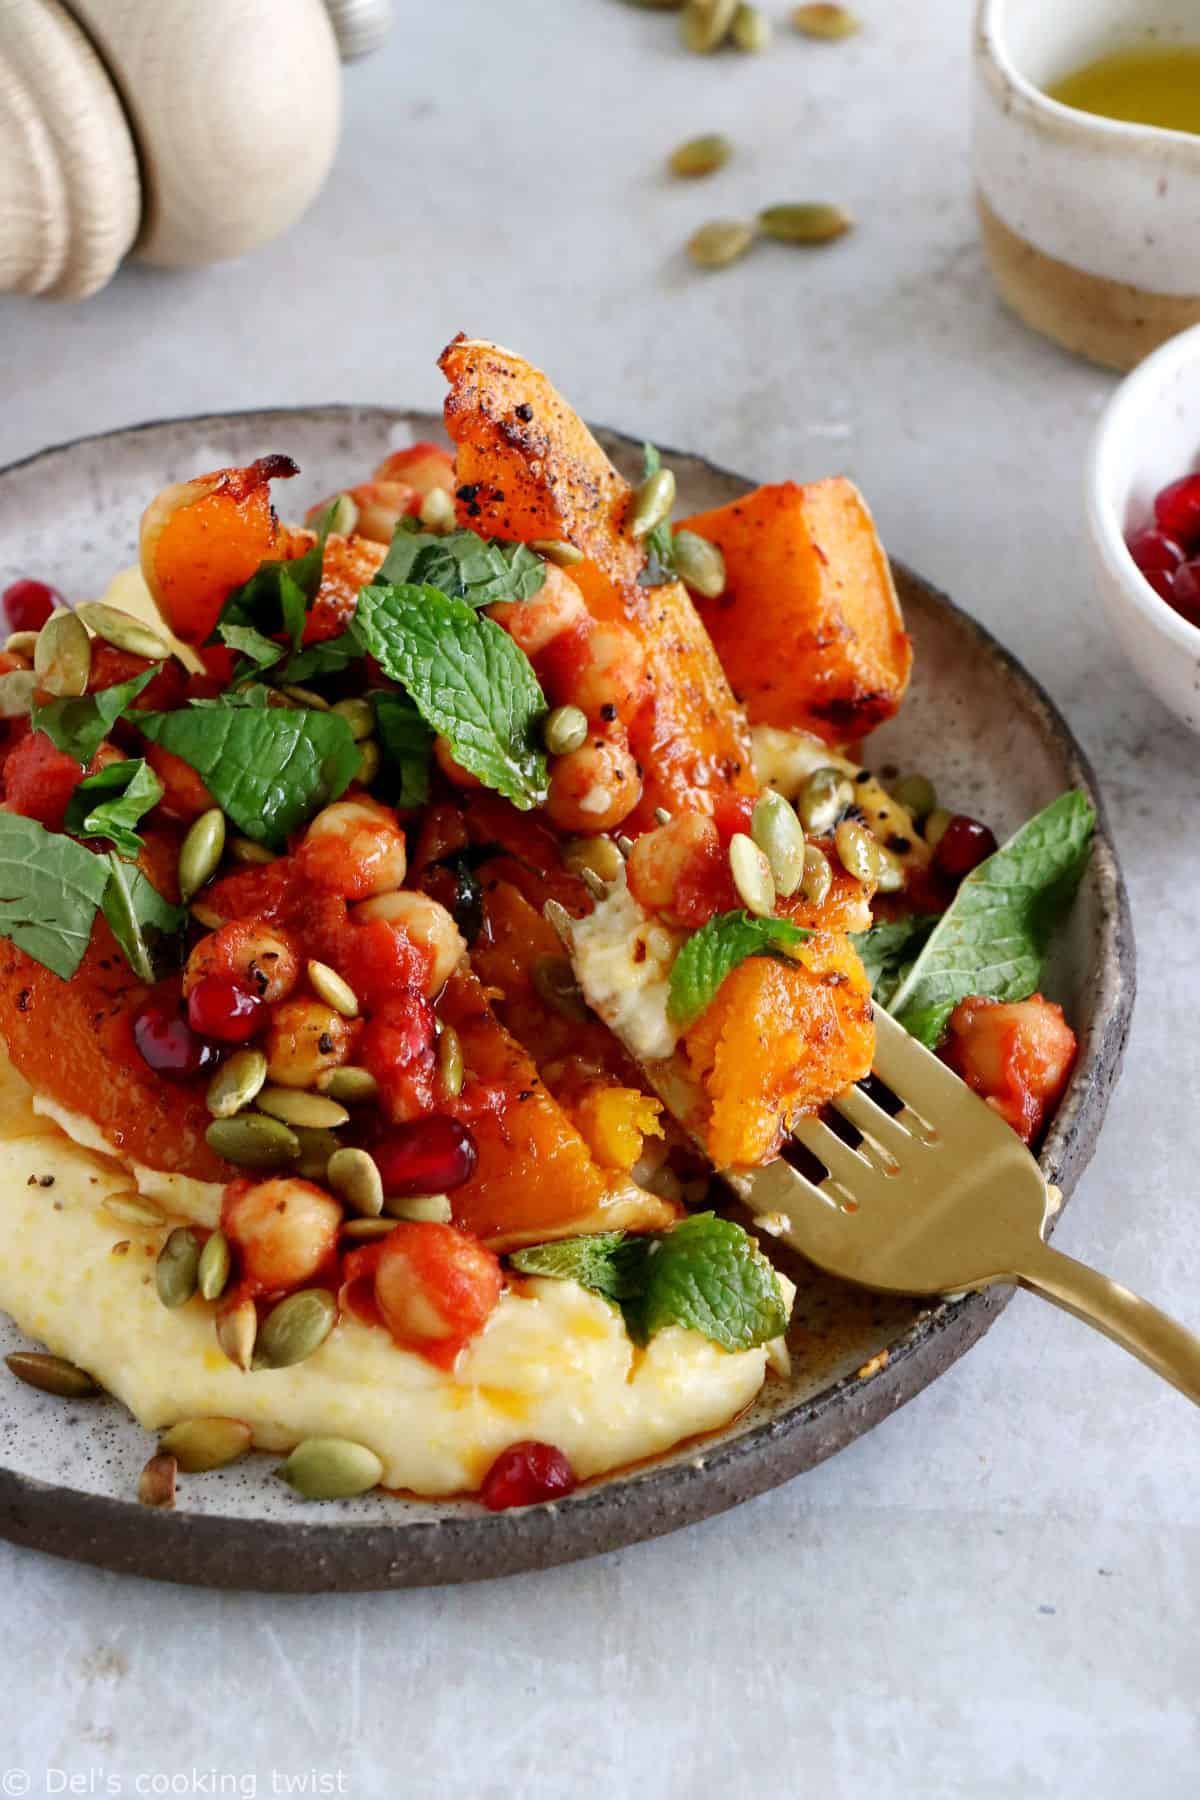 Harissa roasted butternut squash with polenta is a delicious vegetarian dish, loaded with Moroccan flavors.